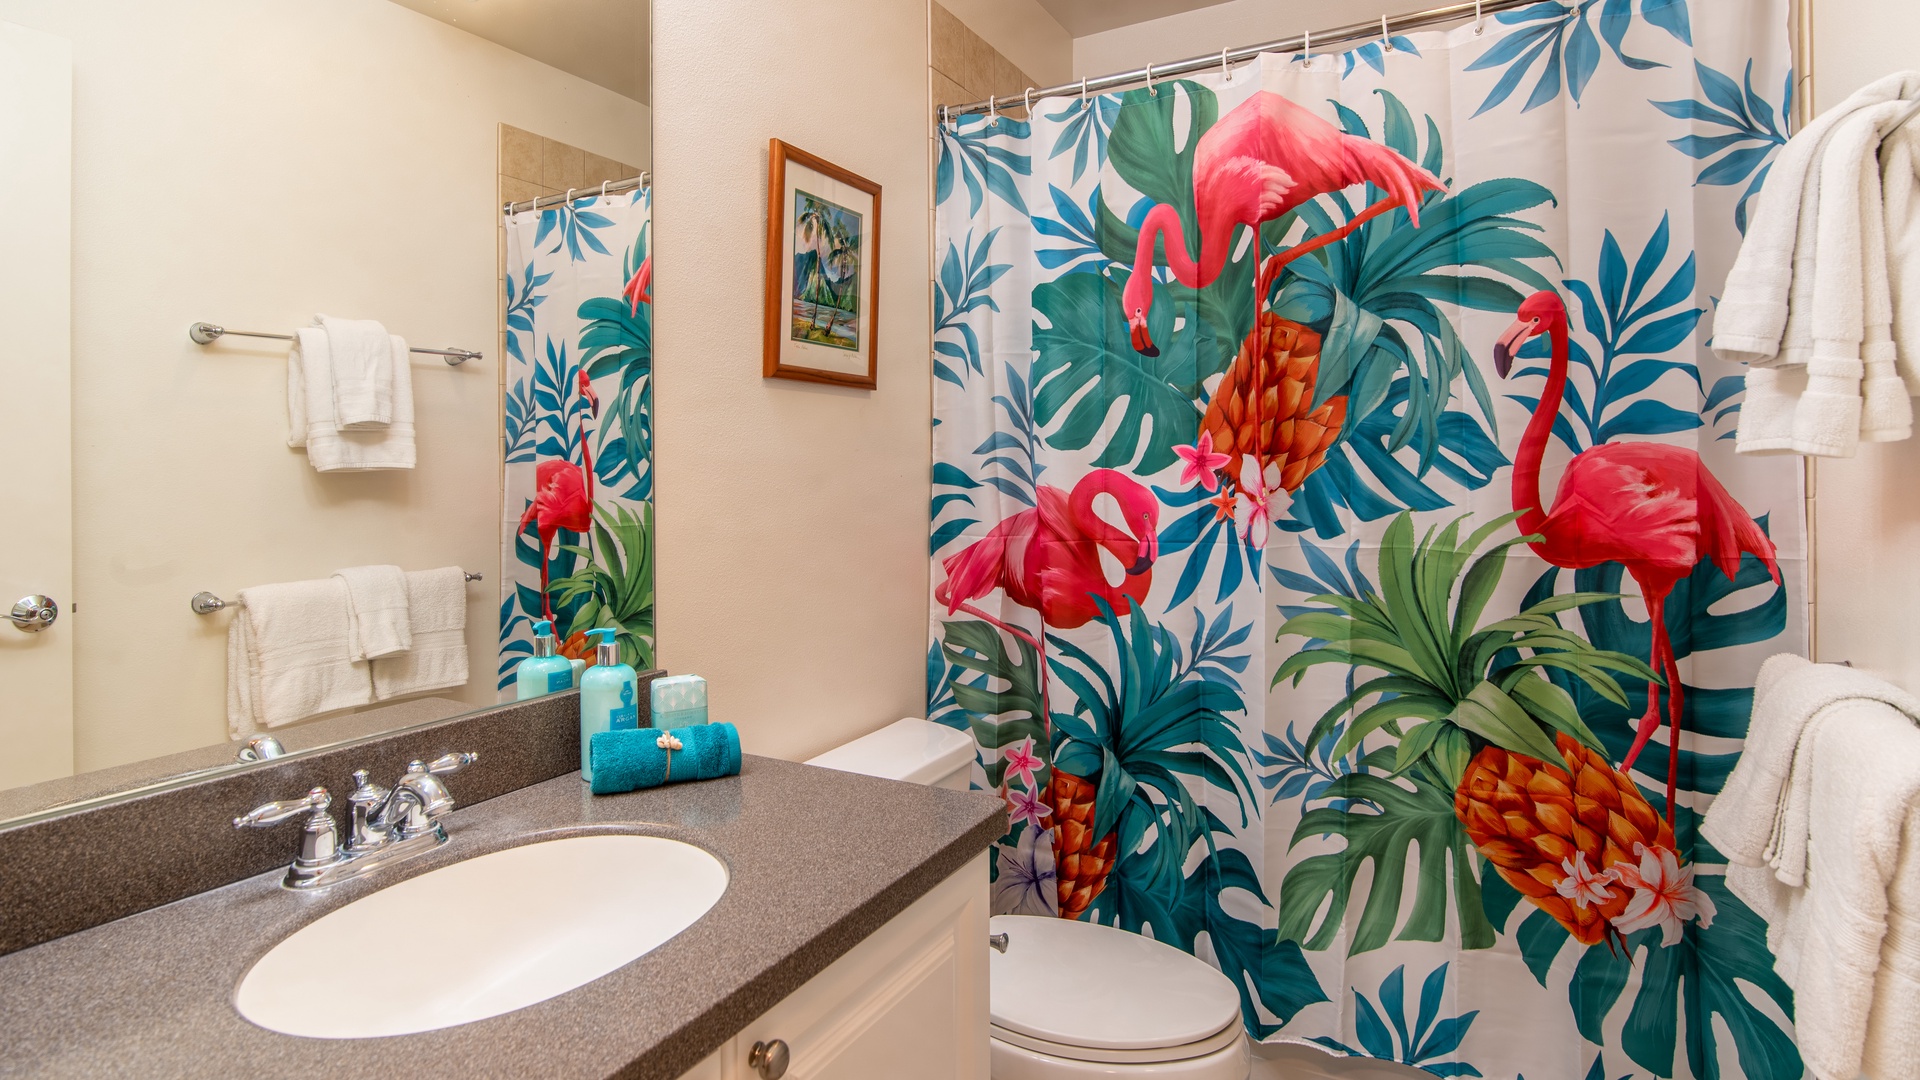 Kapolei Vacation Rentals, Hillside Villas 1538-2 - The second guest bathroom with bright tropical patterns and a shower.